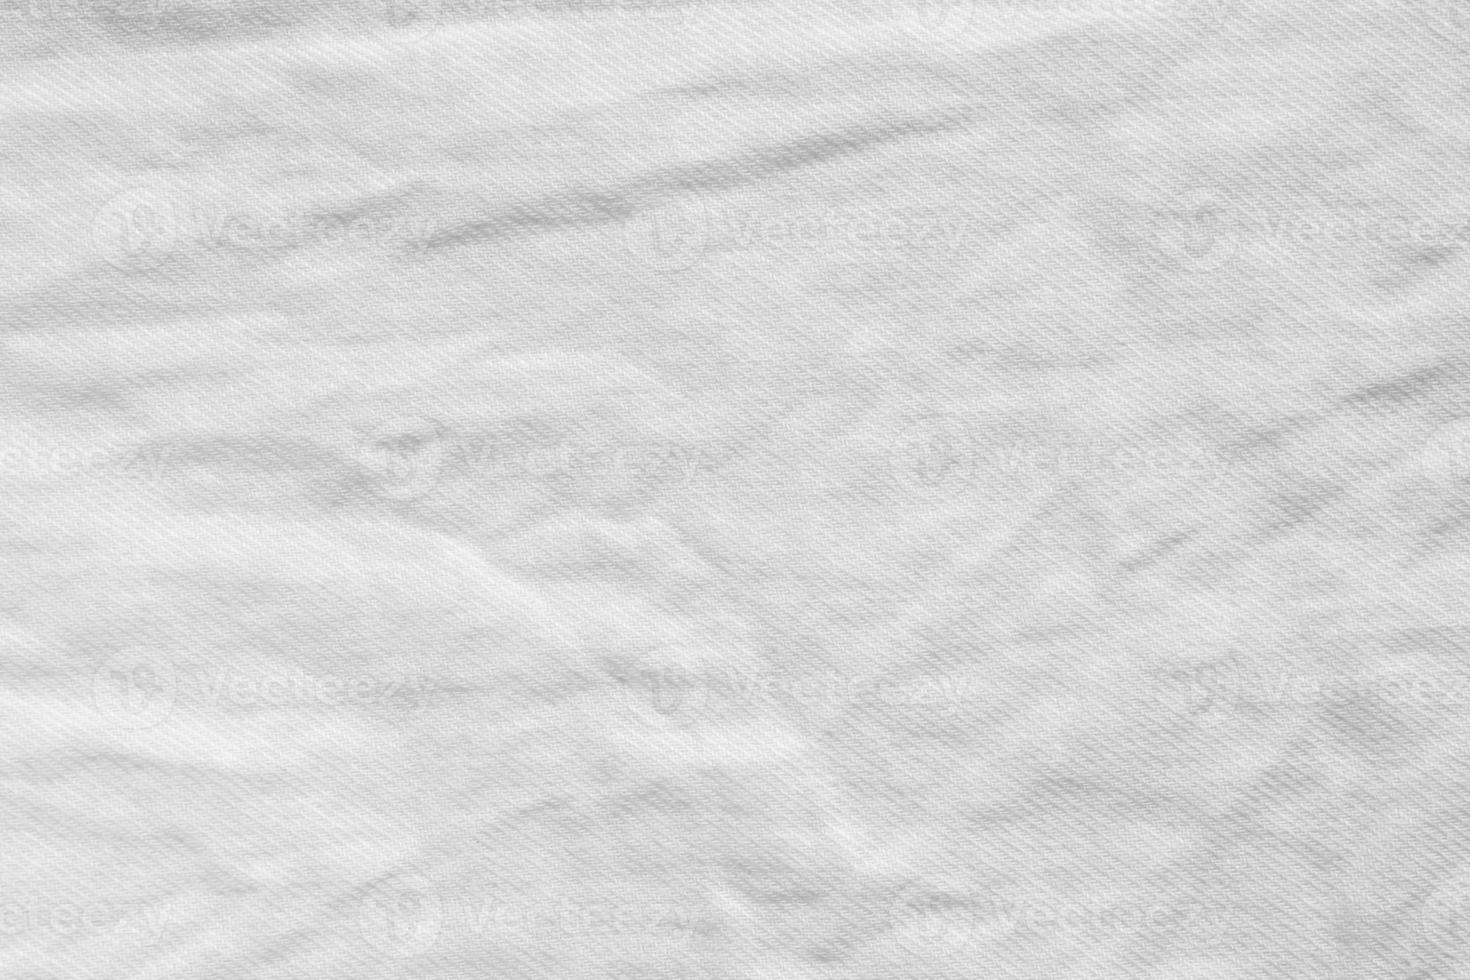 white wrinkle cotton shirt fabric cloth texture pattern background photo